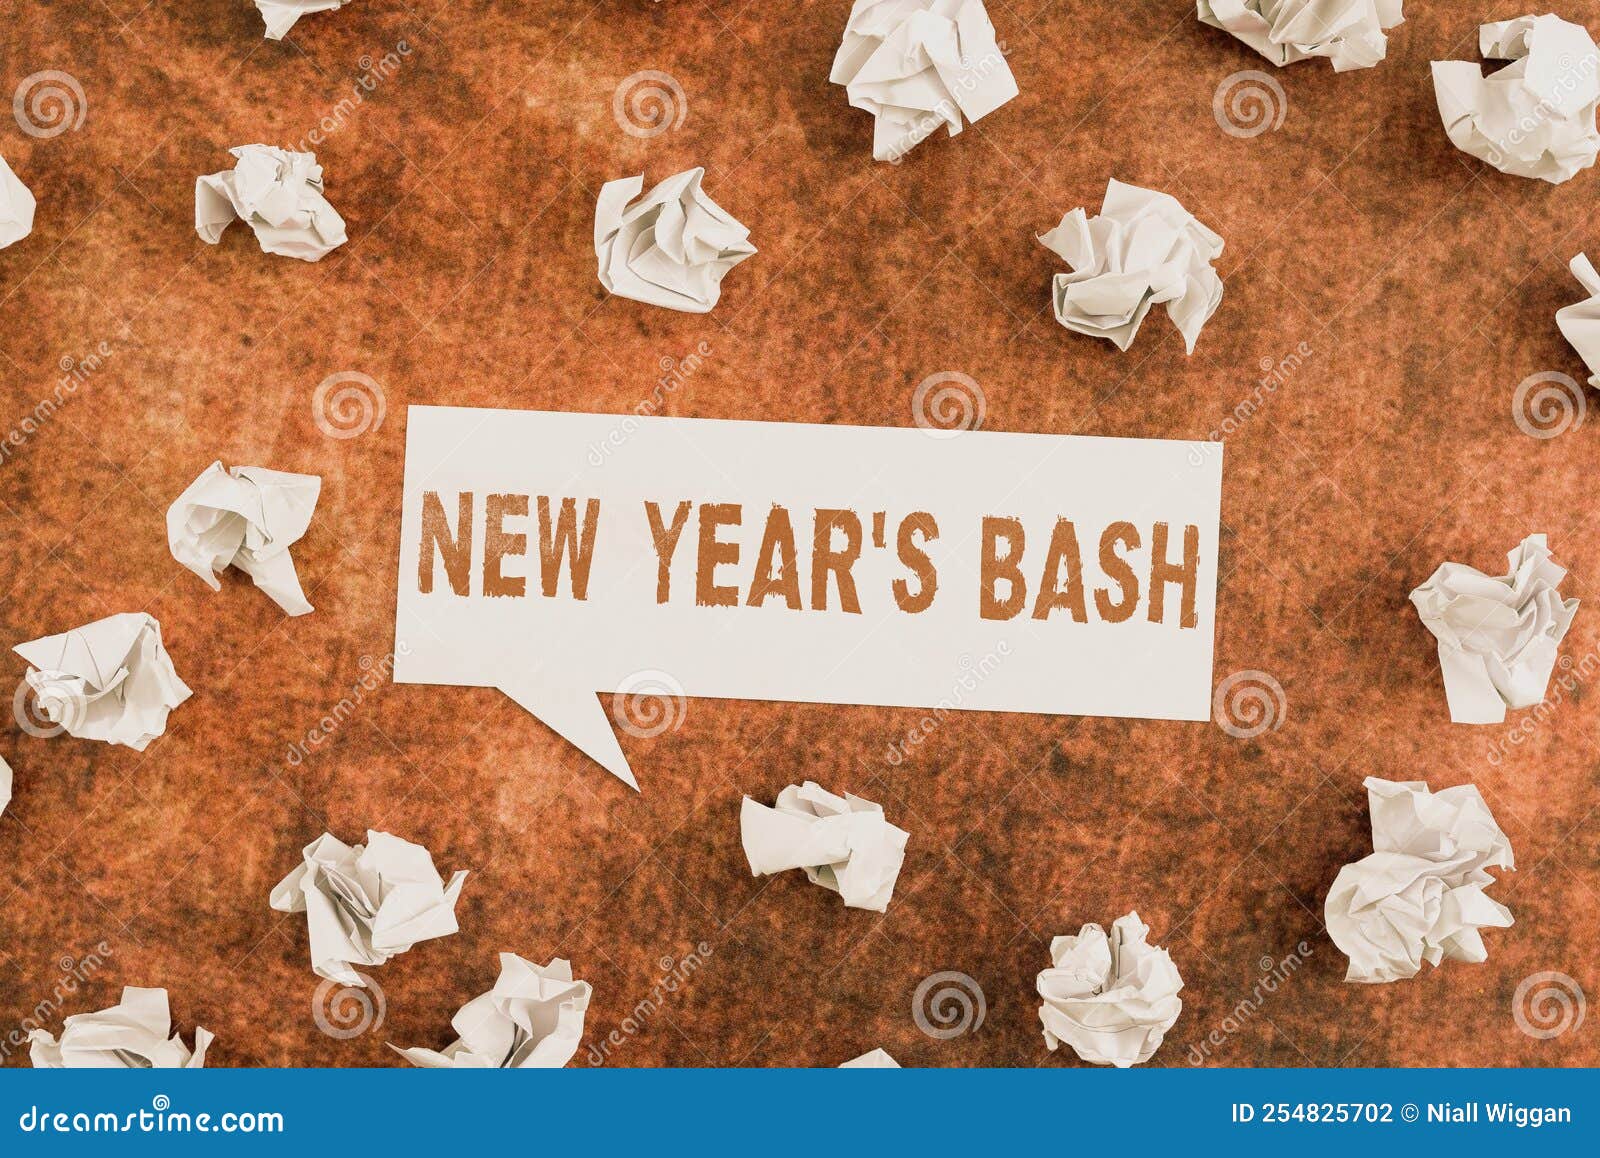 Writing Displaying Text New Year S Bash. Business Concept Celebration